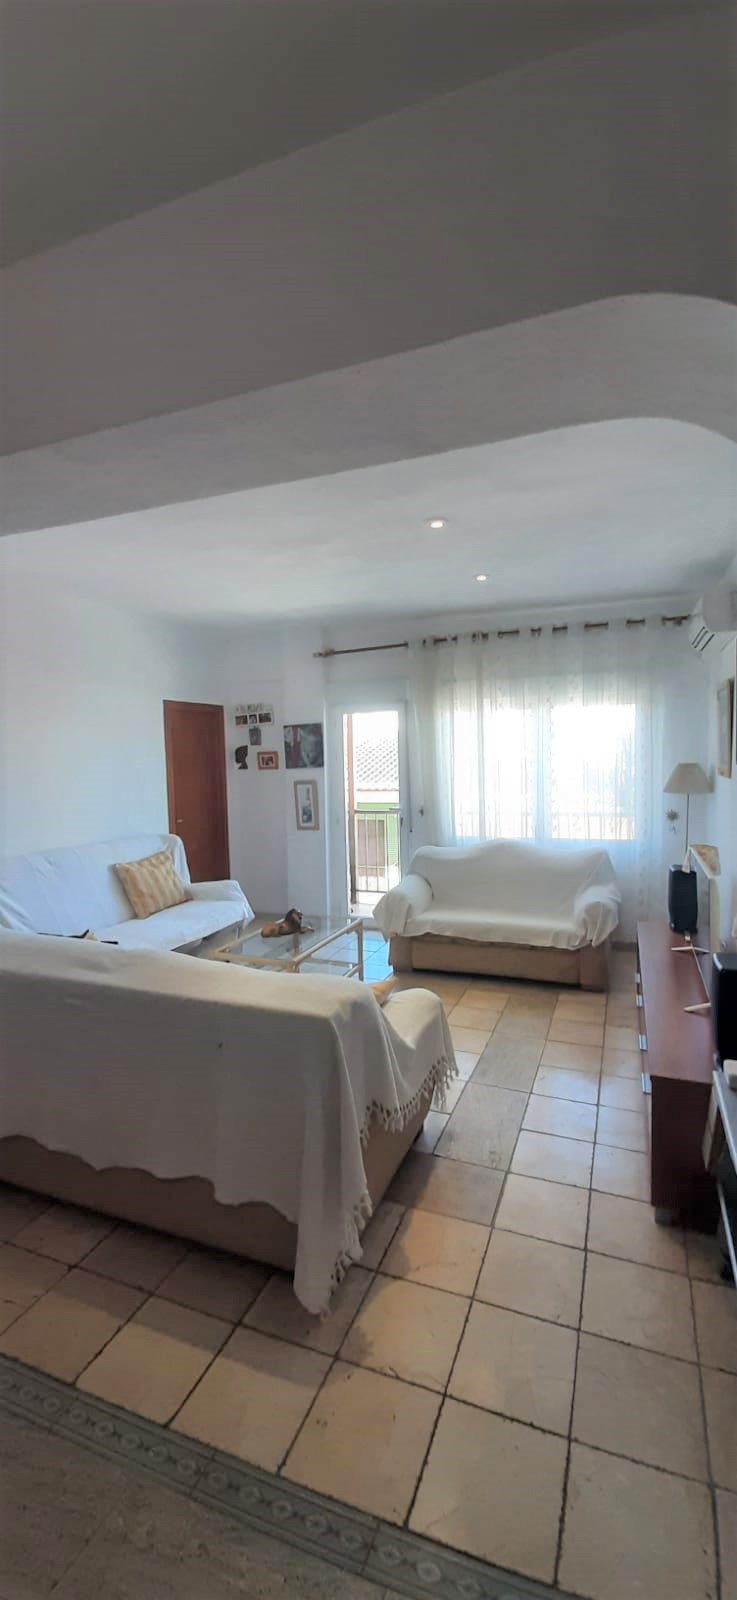 Apartment a few meters from the port and the beach. Els Magazinos area.